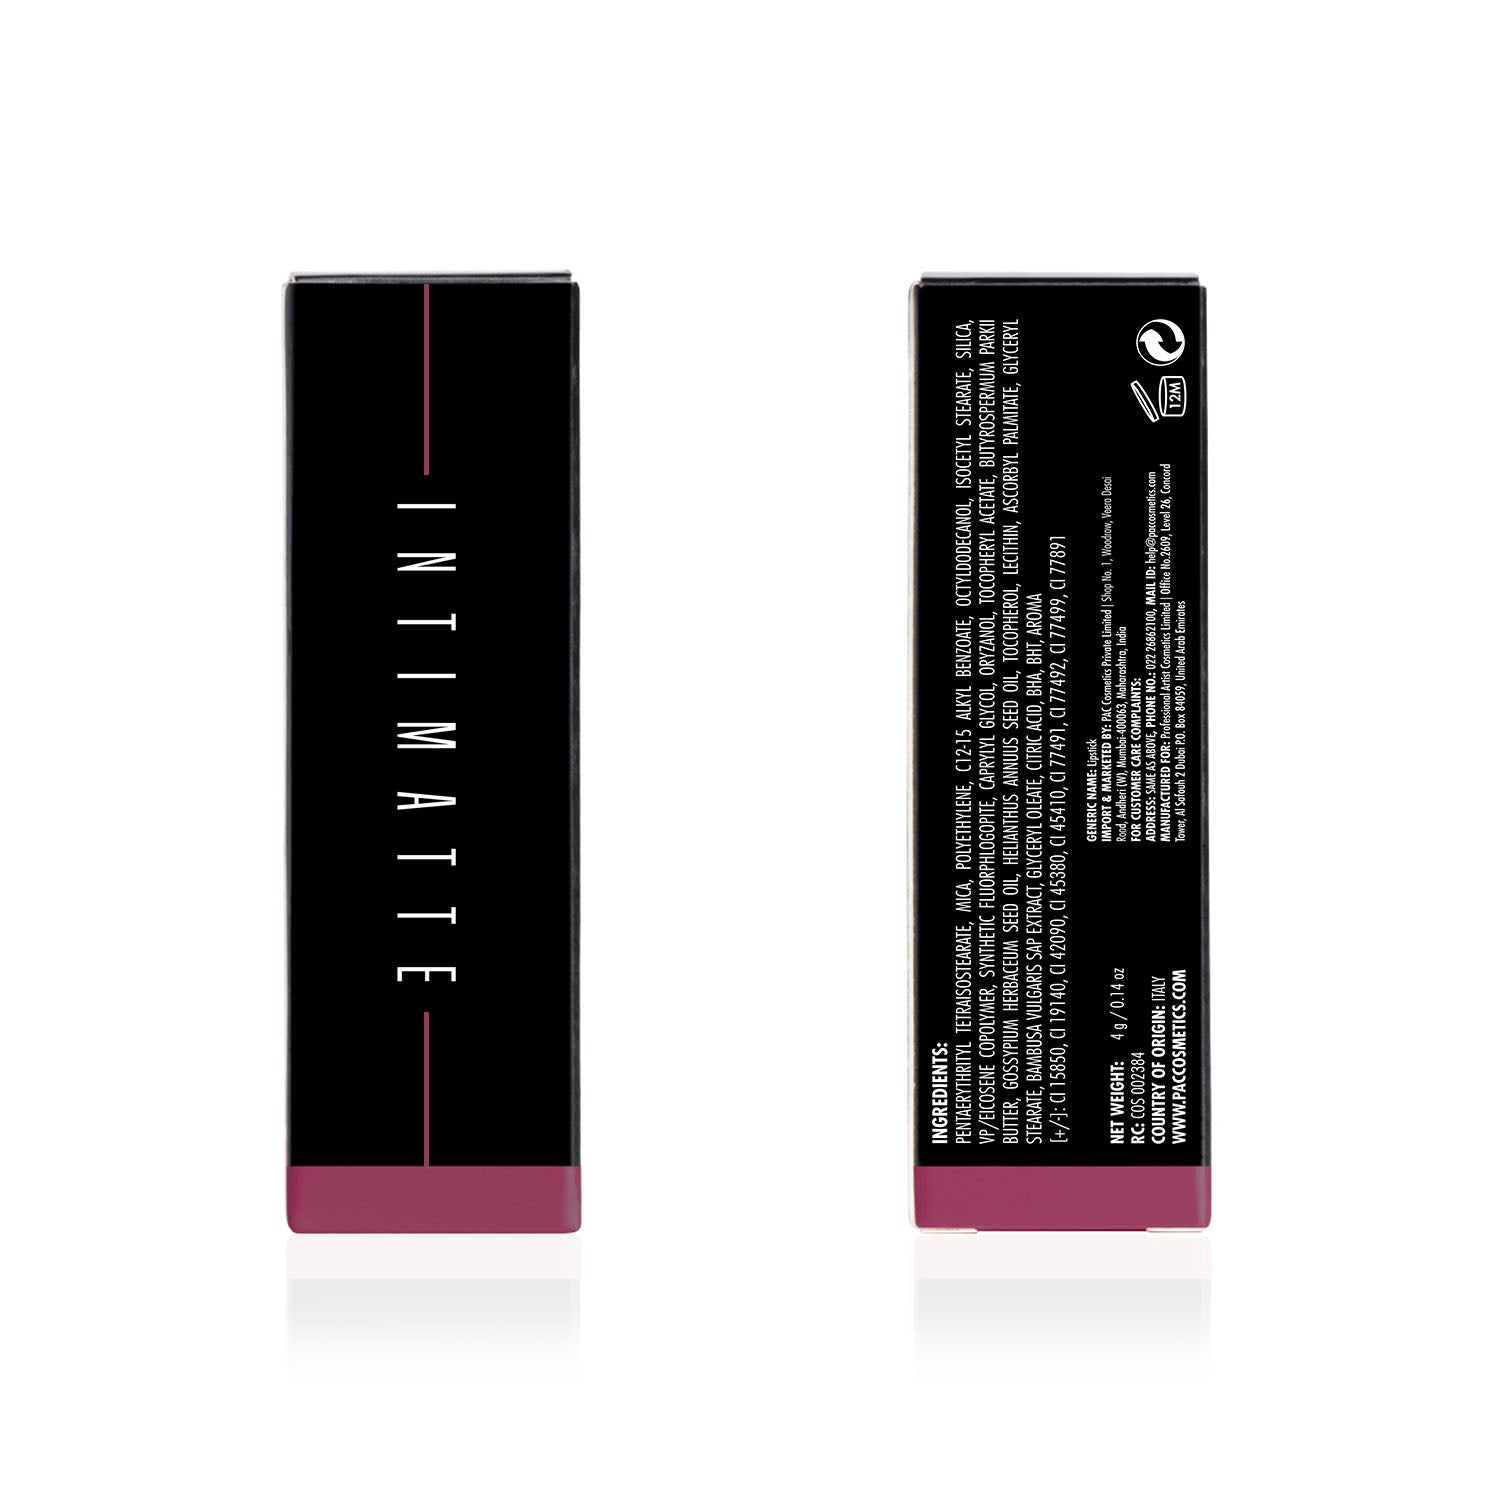 PAC Cosmetics Intimatte Lipstick (4g) #Color_On The Edge